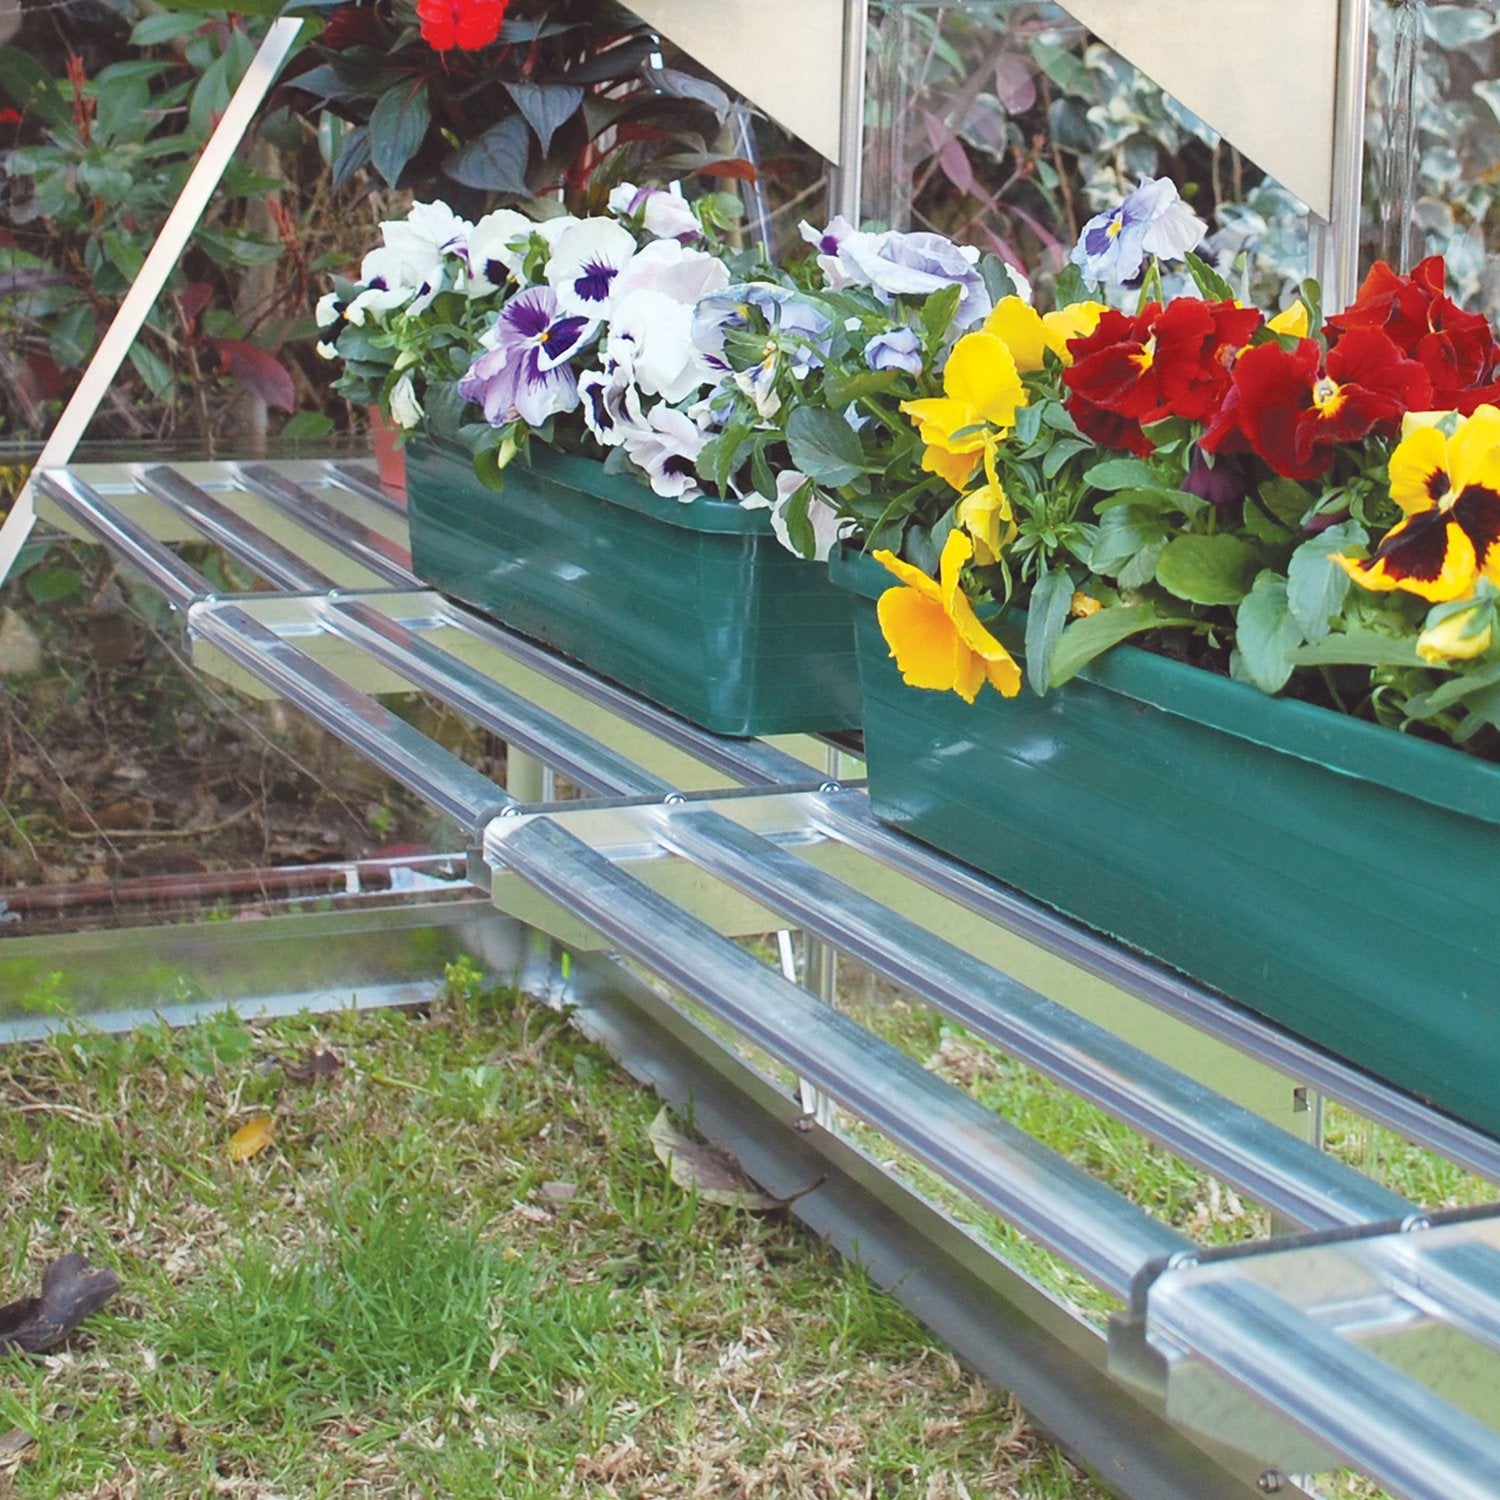 Heavy Duty Shelf for the Canopia® Greenhouses - Dive To Garden